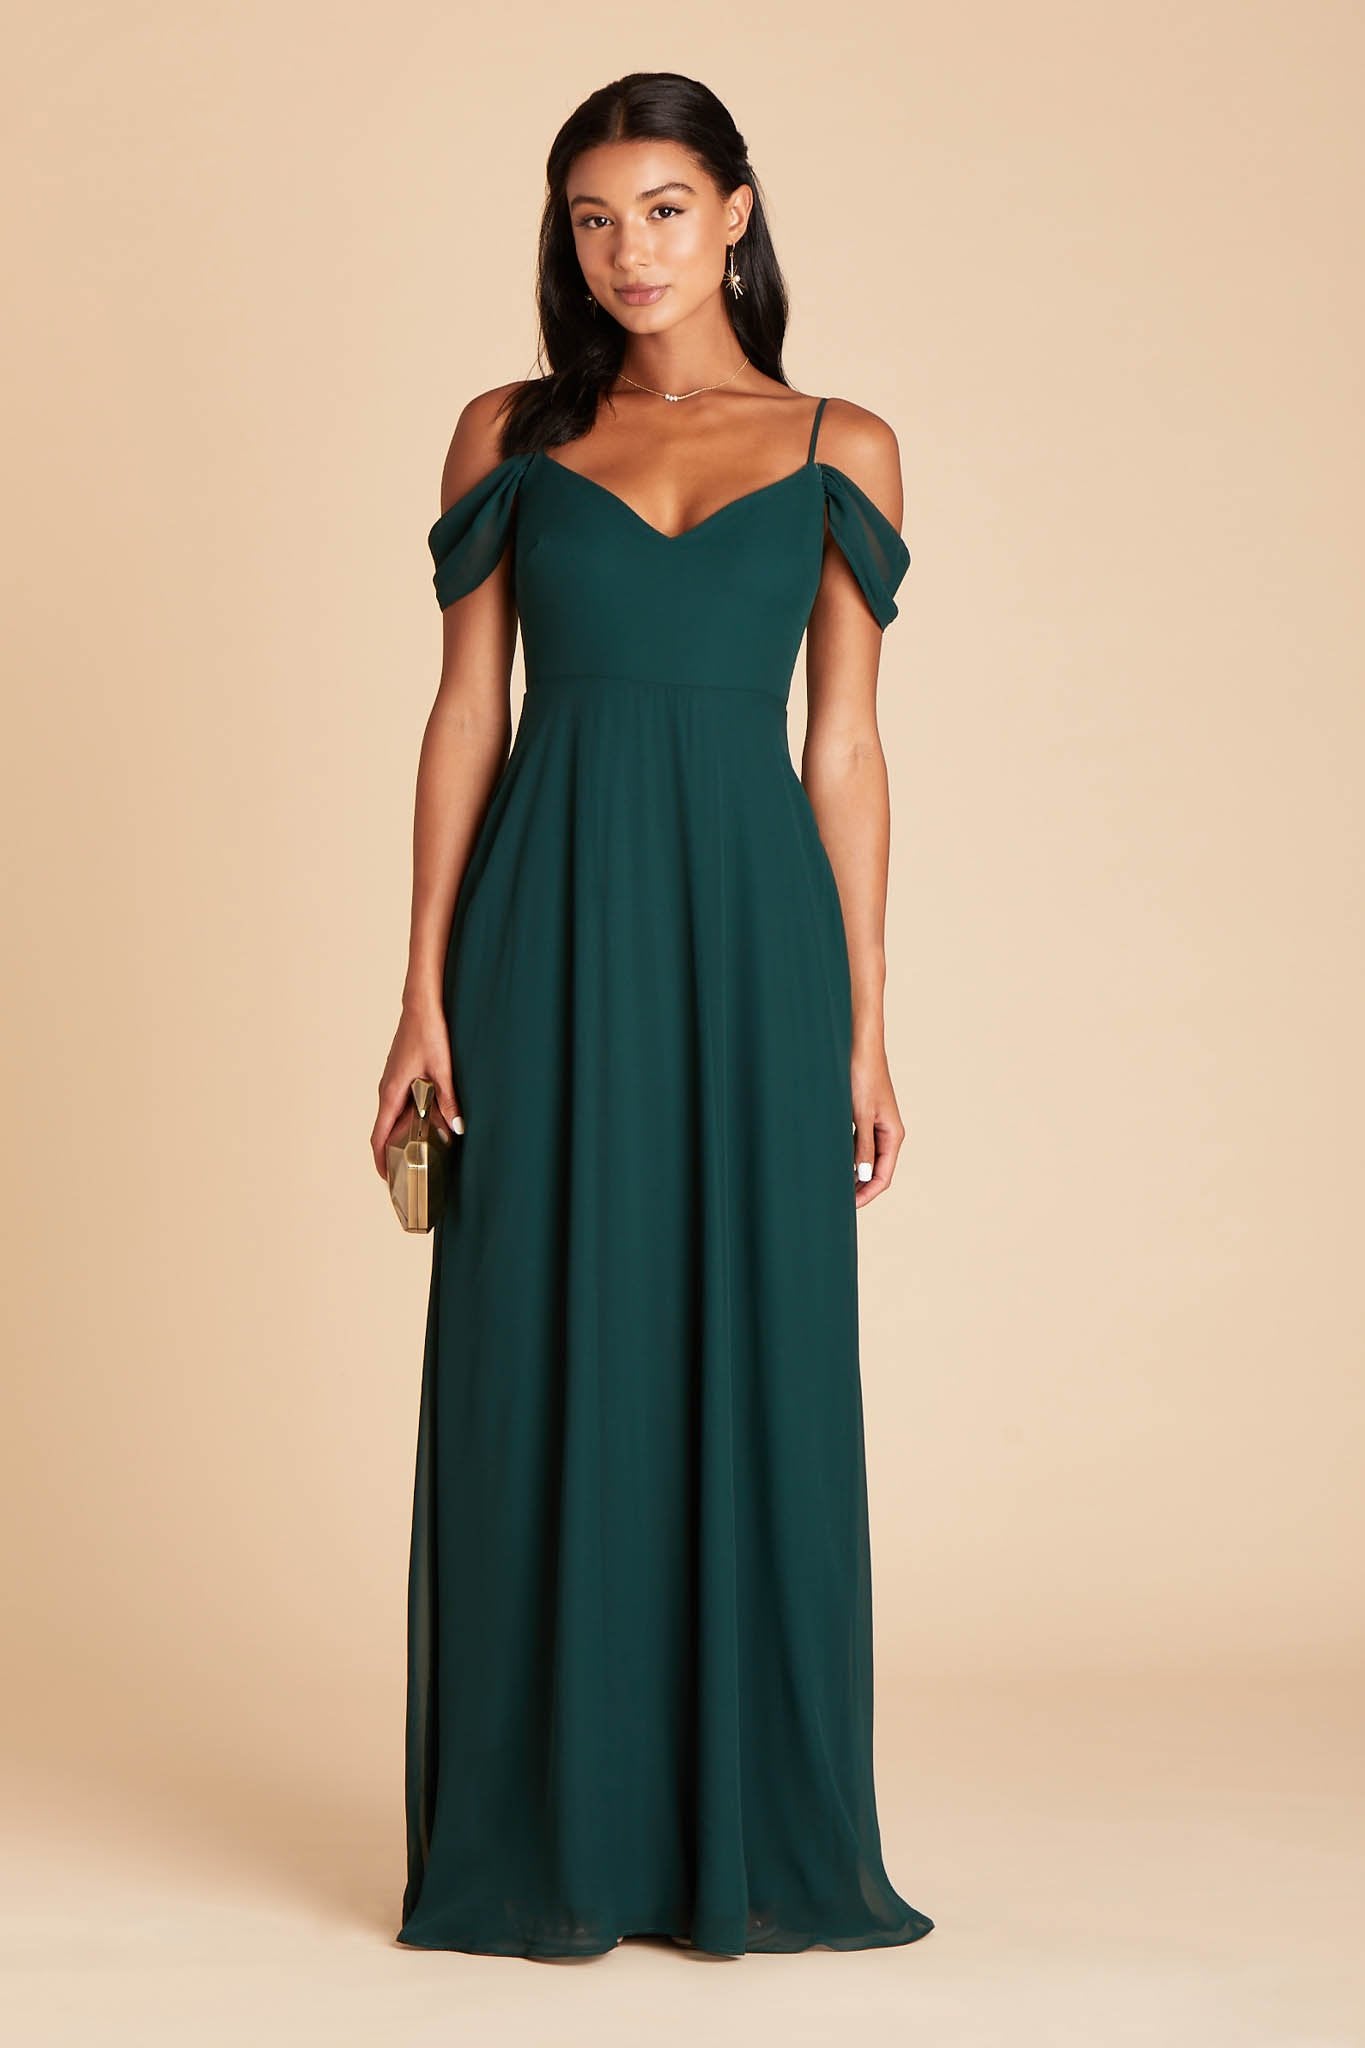 Front view of the floor-length Devin Convertible Bridesmaid Dress features a fitted bust and waist with a full skirt that flows to the floor.